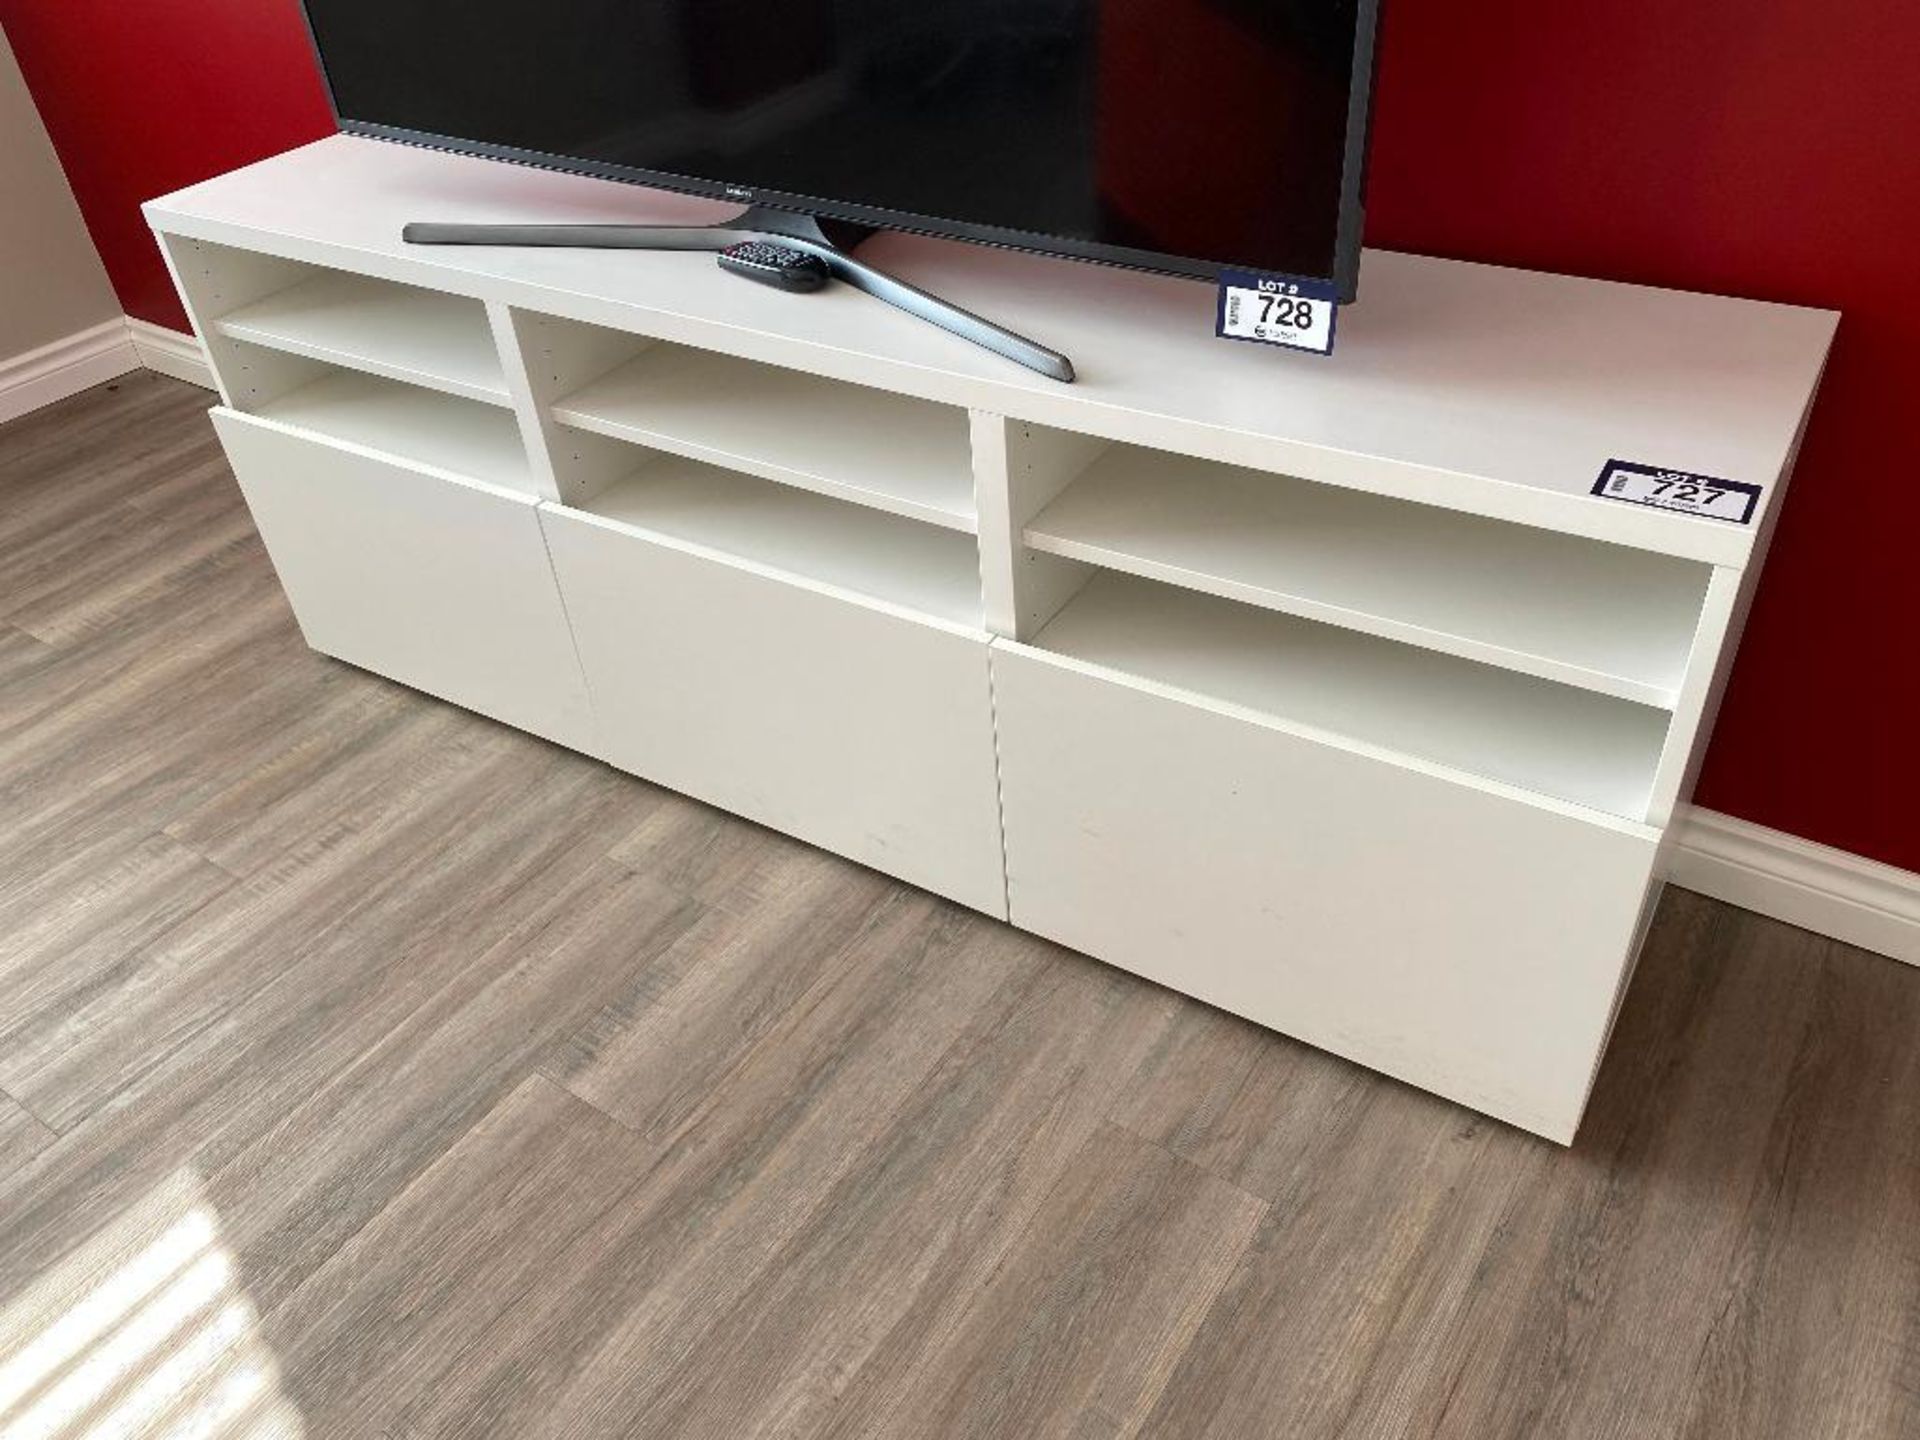 15-1/2" X 71" TV Stand